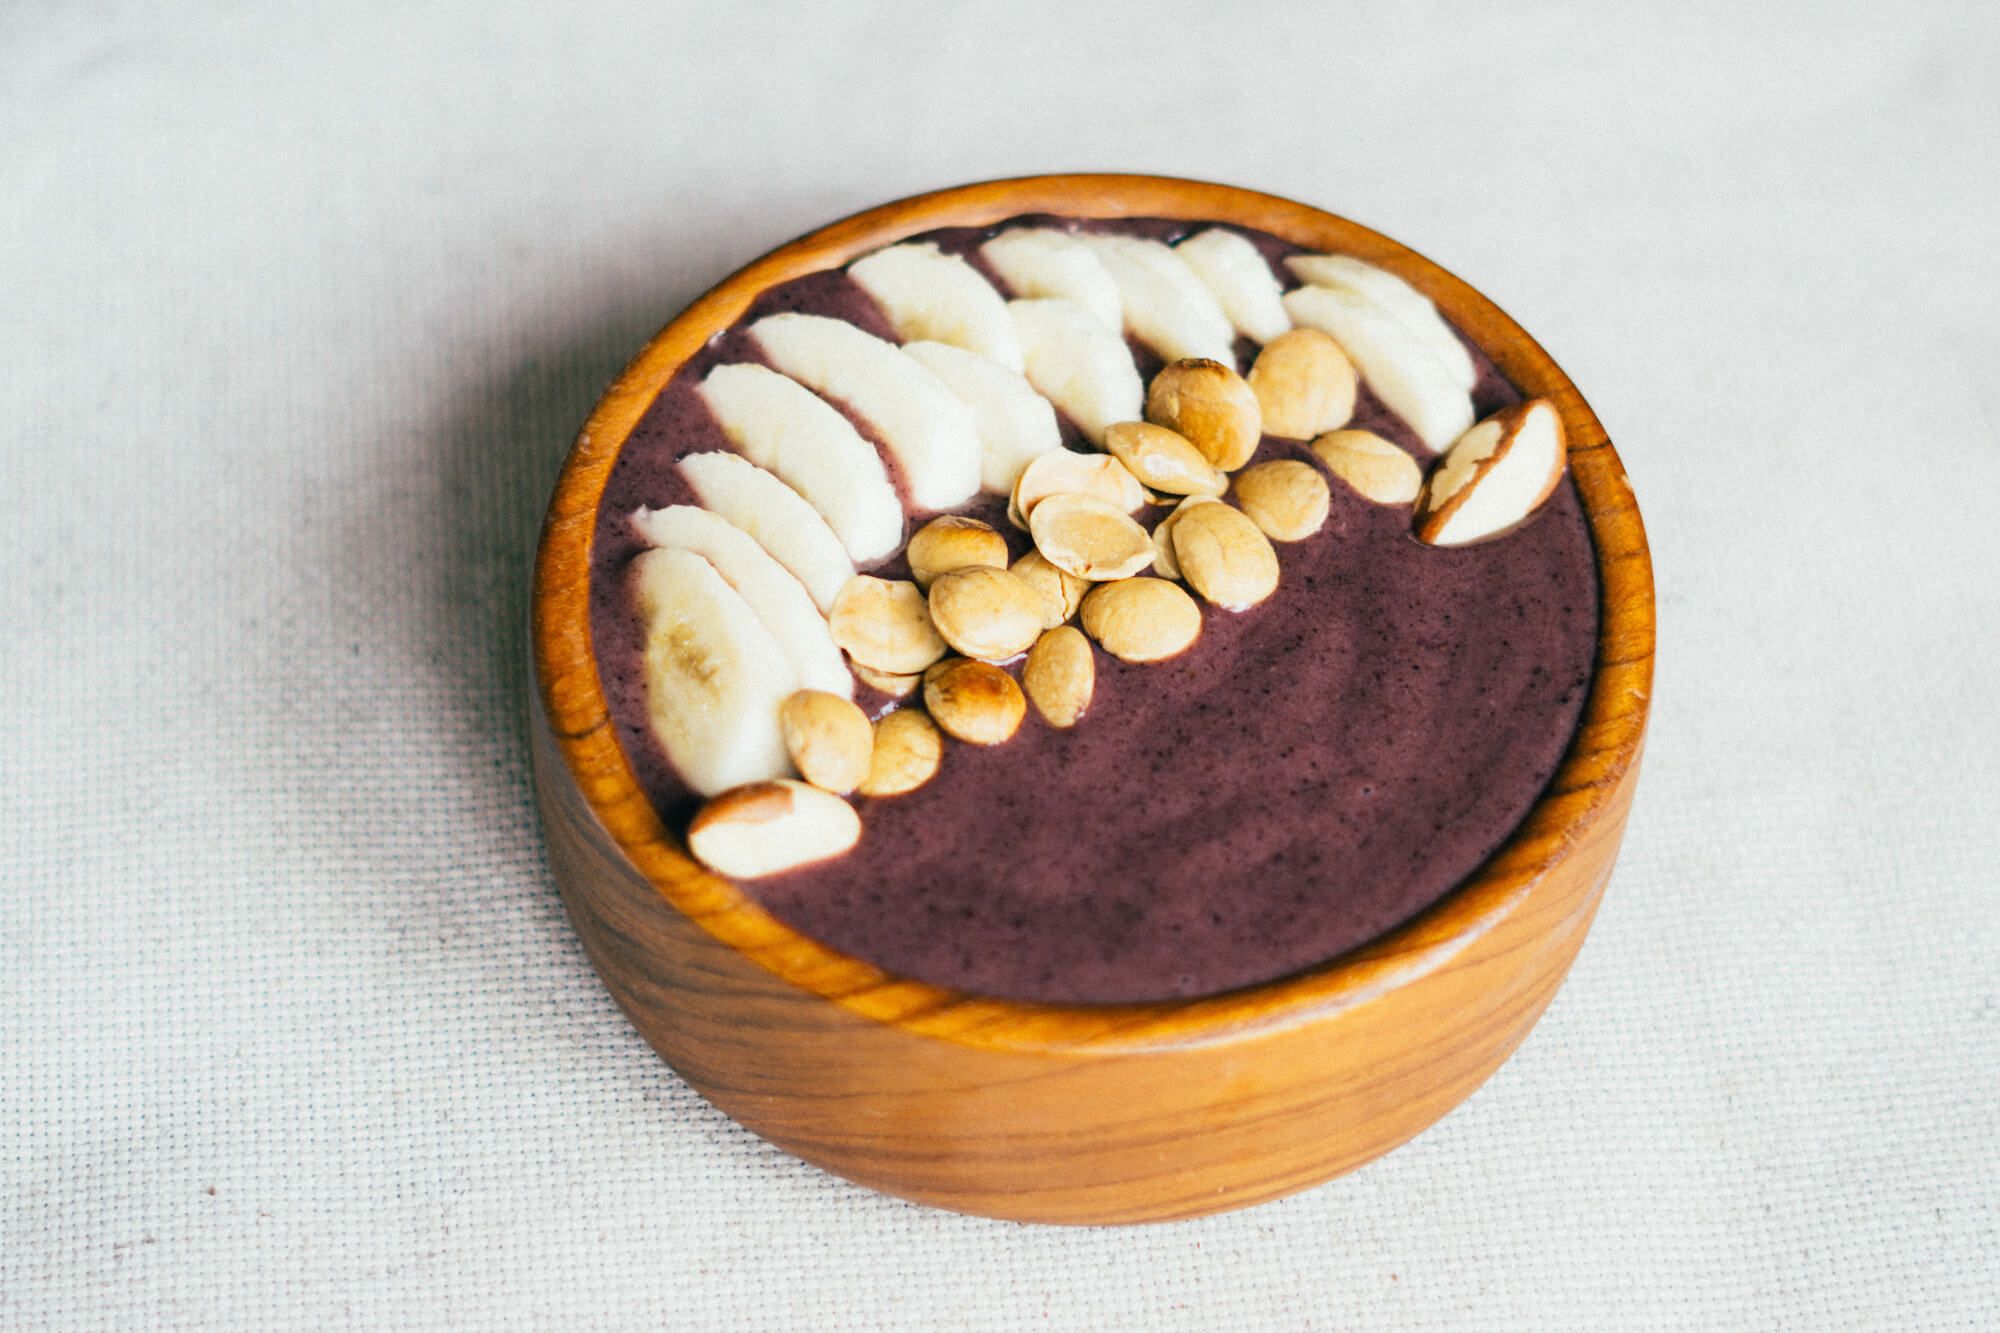 Recipe for an Amazonian açaí bowl with bananas and sacha inchi seeds